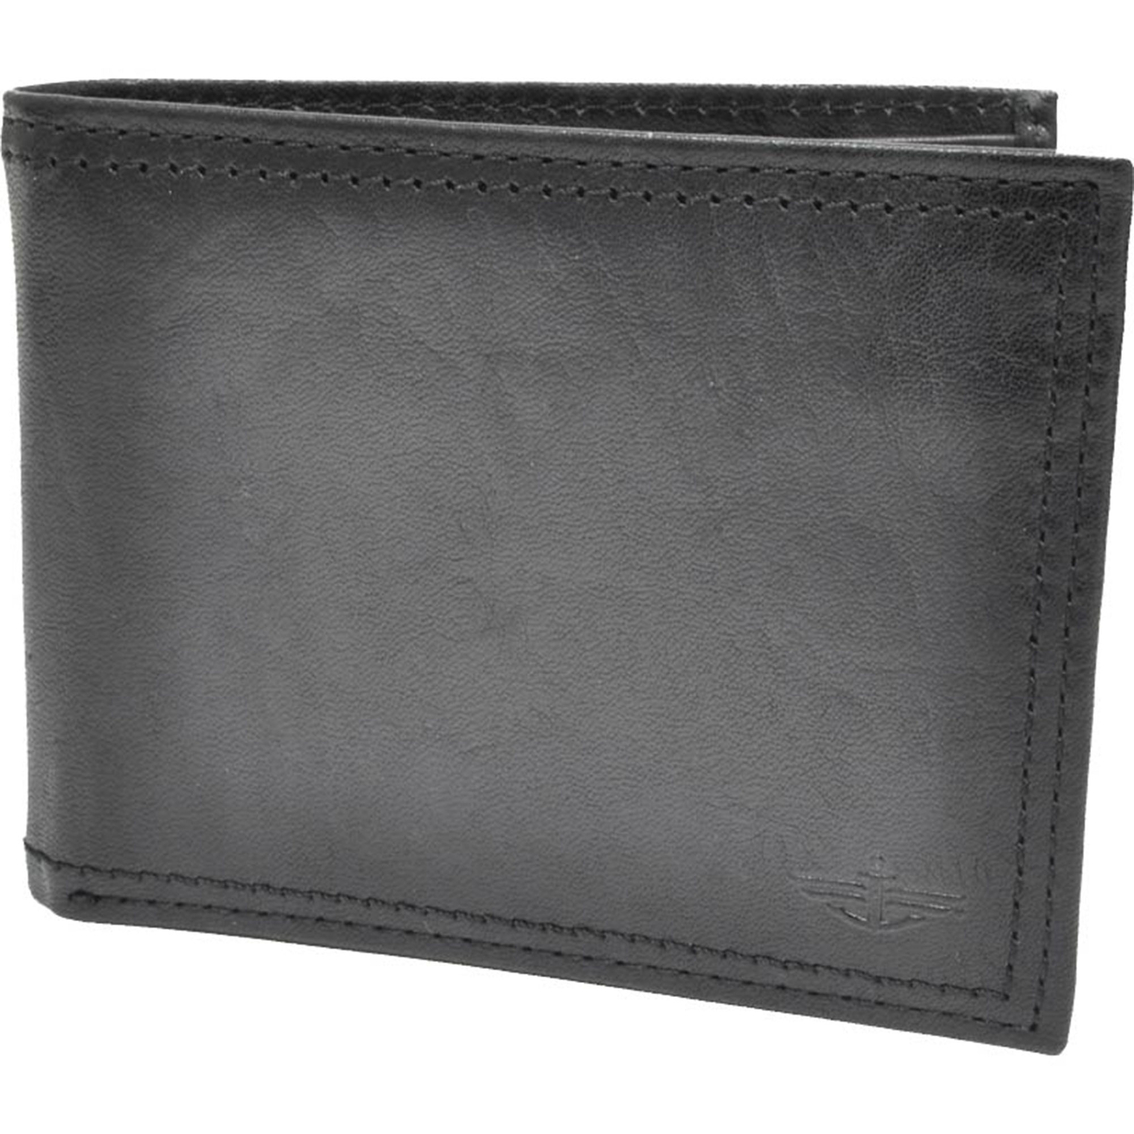 Dockers Wallet | Wallets | Clothing & Accessories | Shop The Exchange